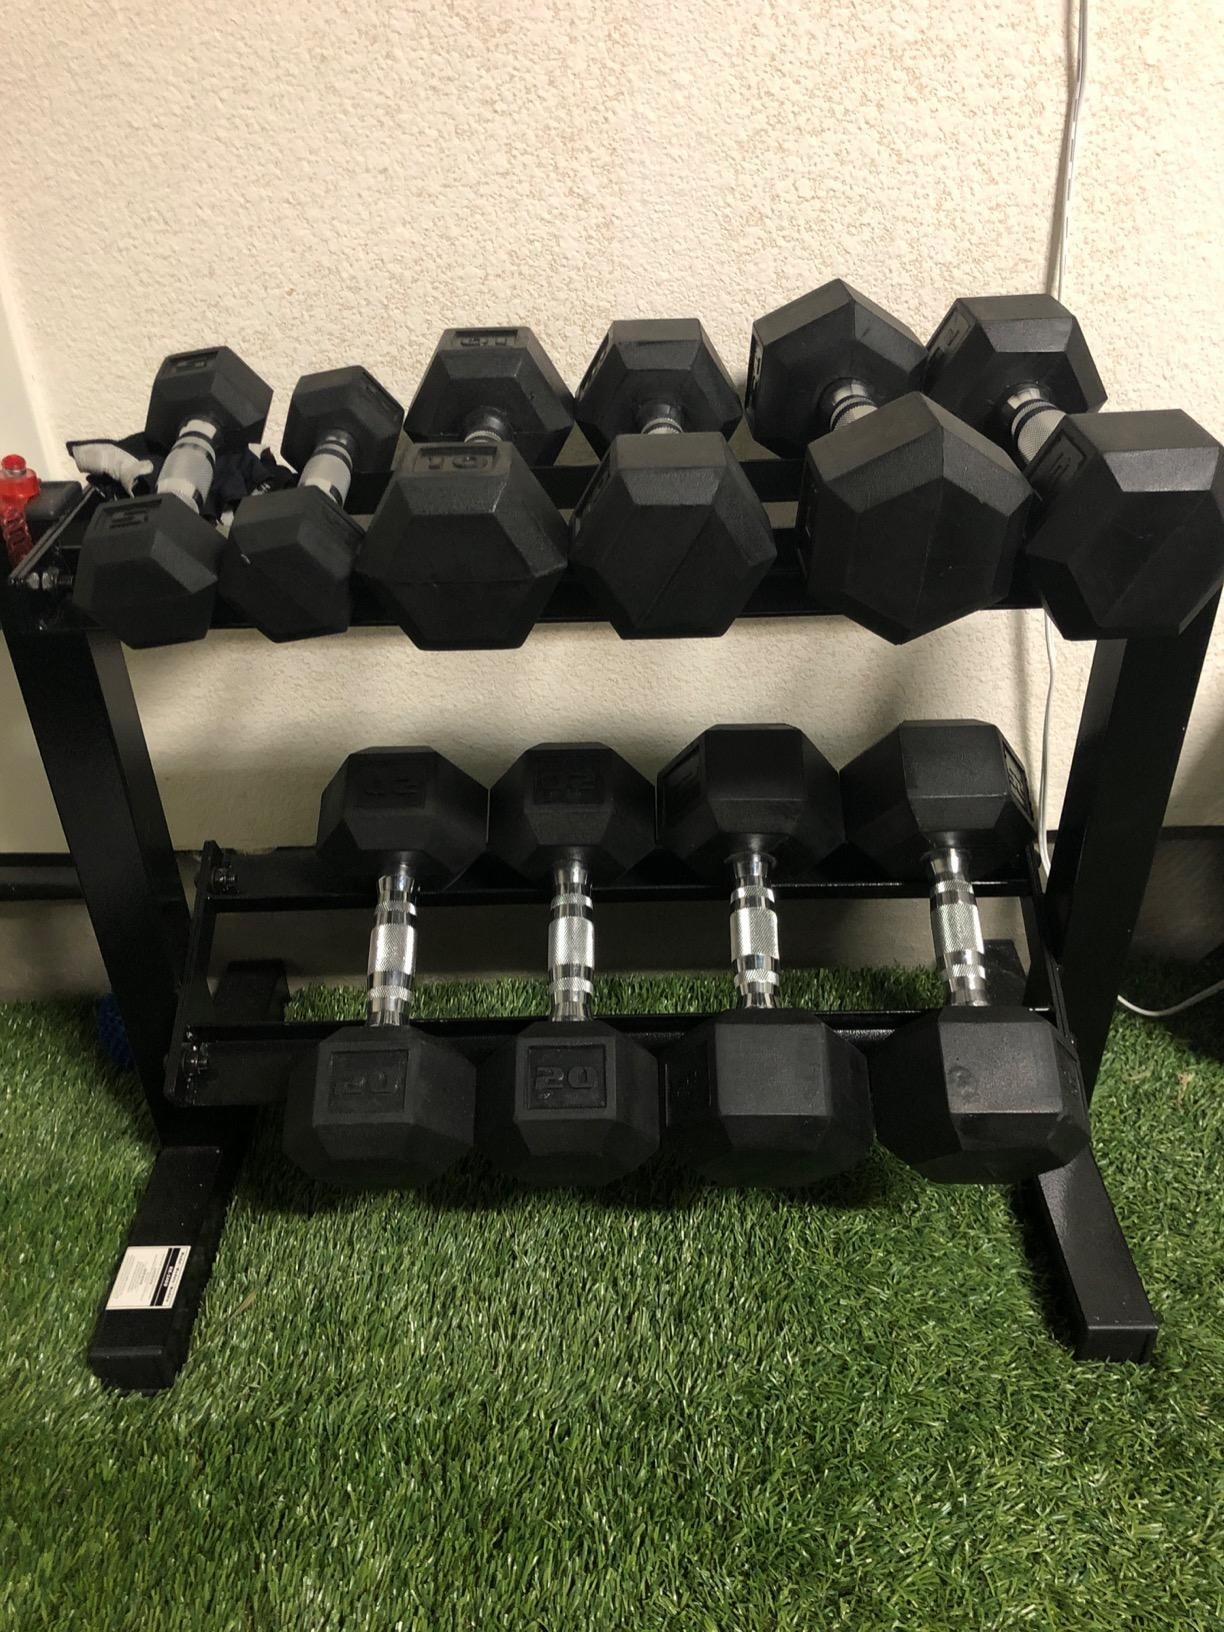 Reviewer photo of the dumbbell set on top of the rack